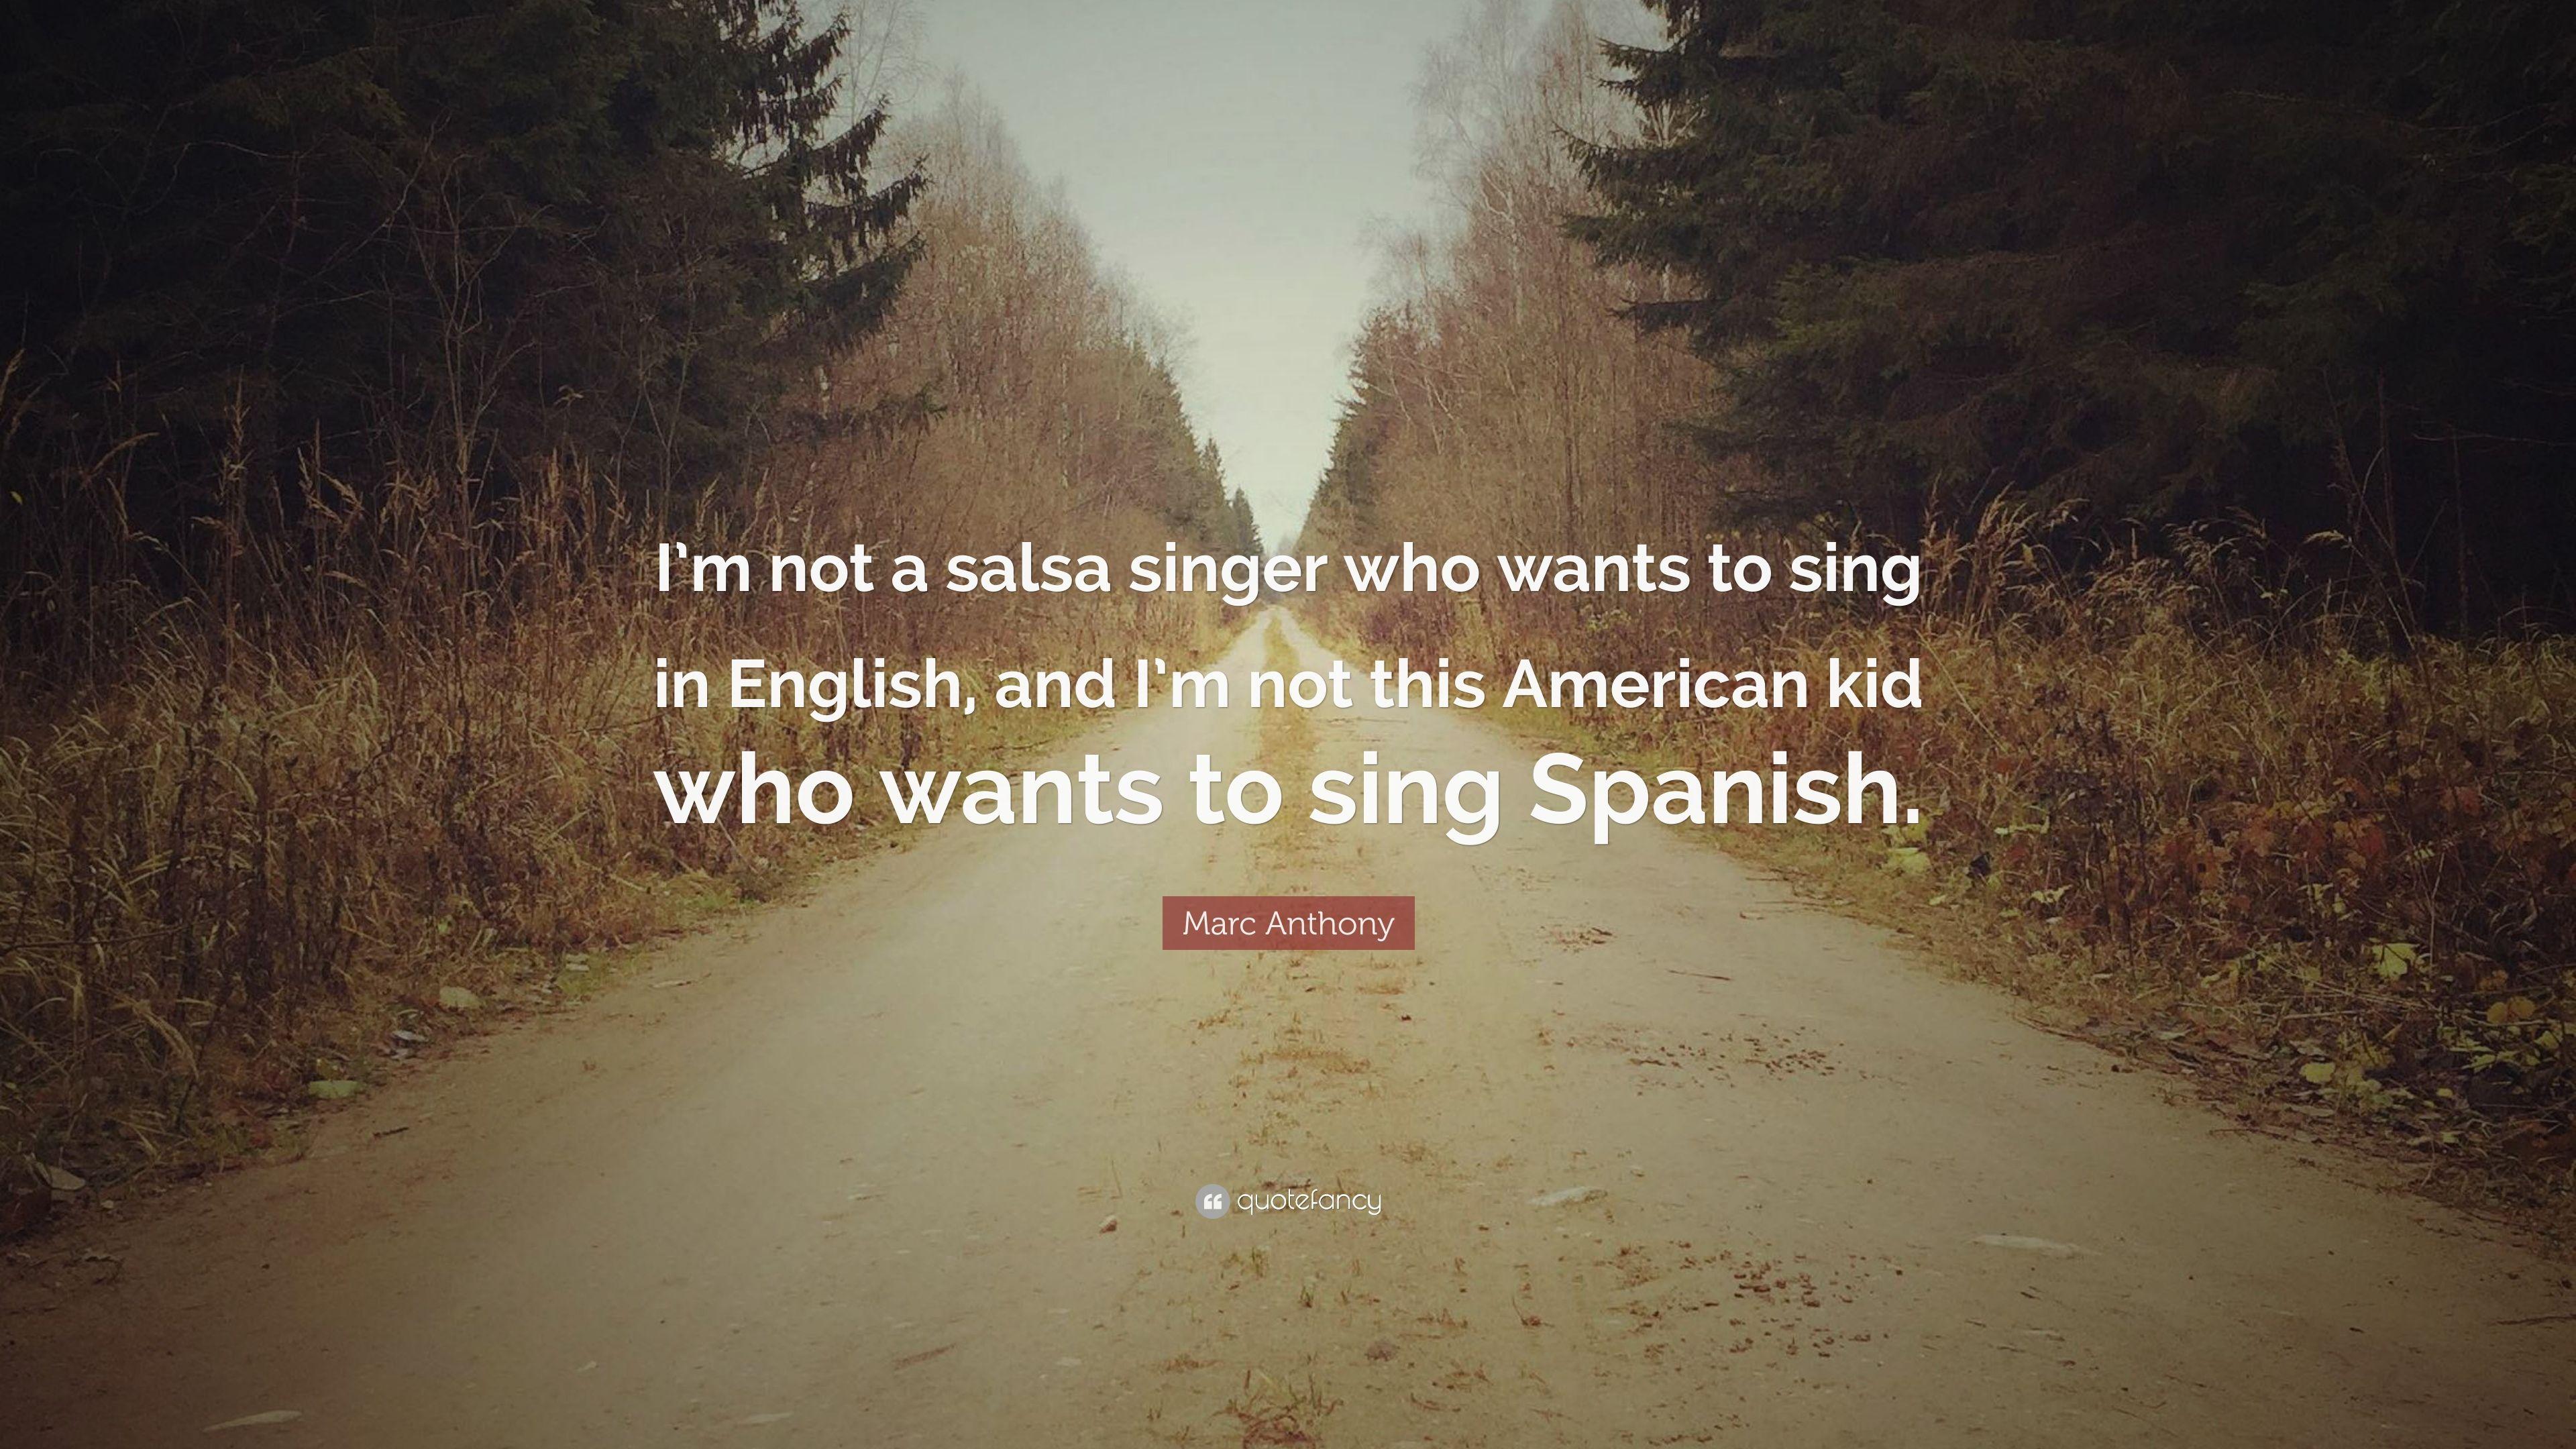 Marc Anthony Quote: “I'm not a salsa singer who wants to sing